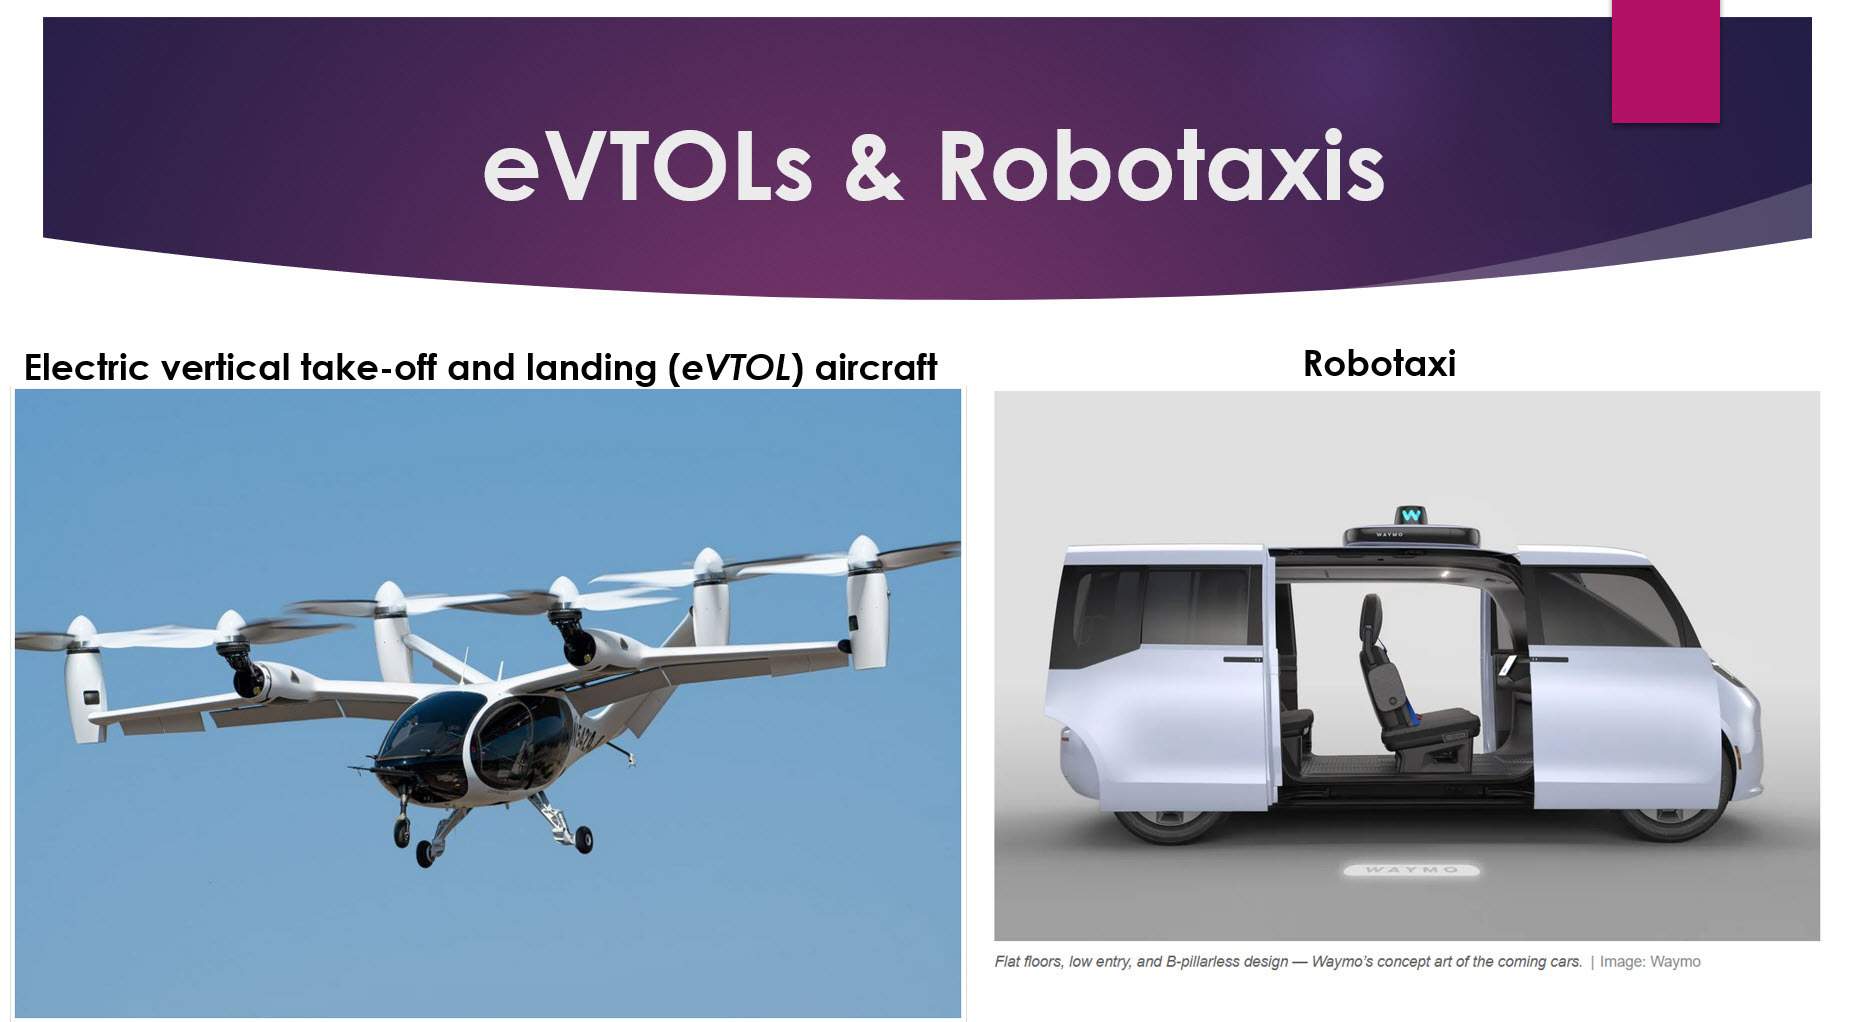 eVTOLs and Robotaxis